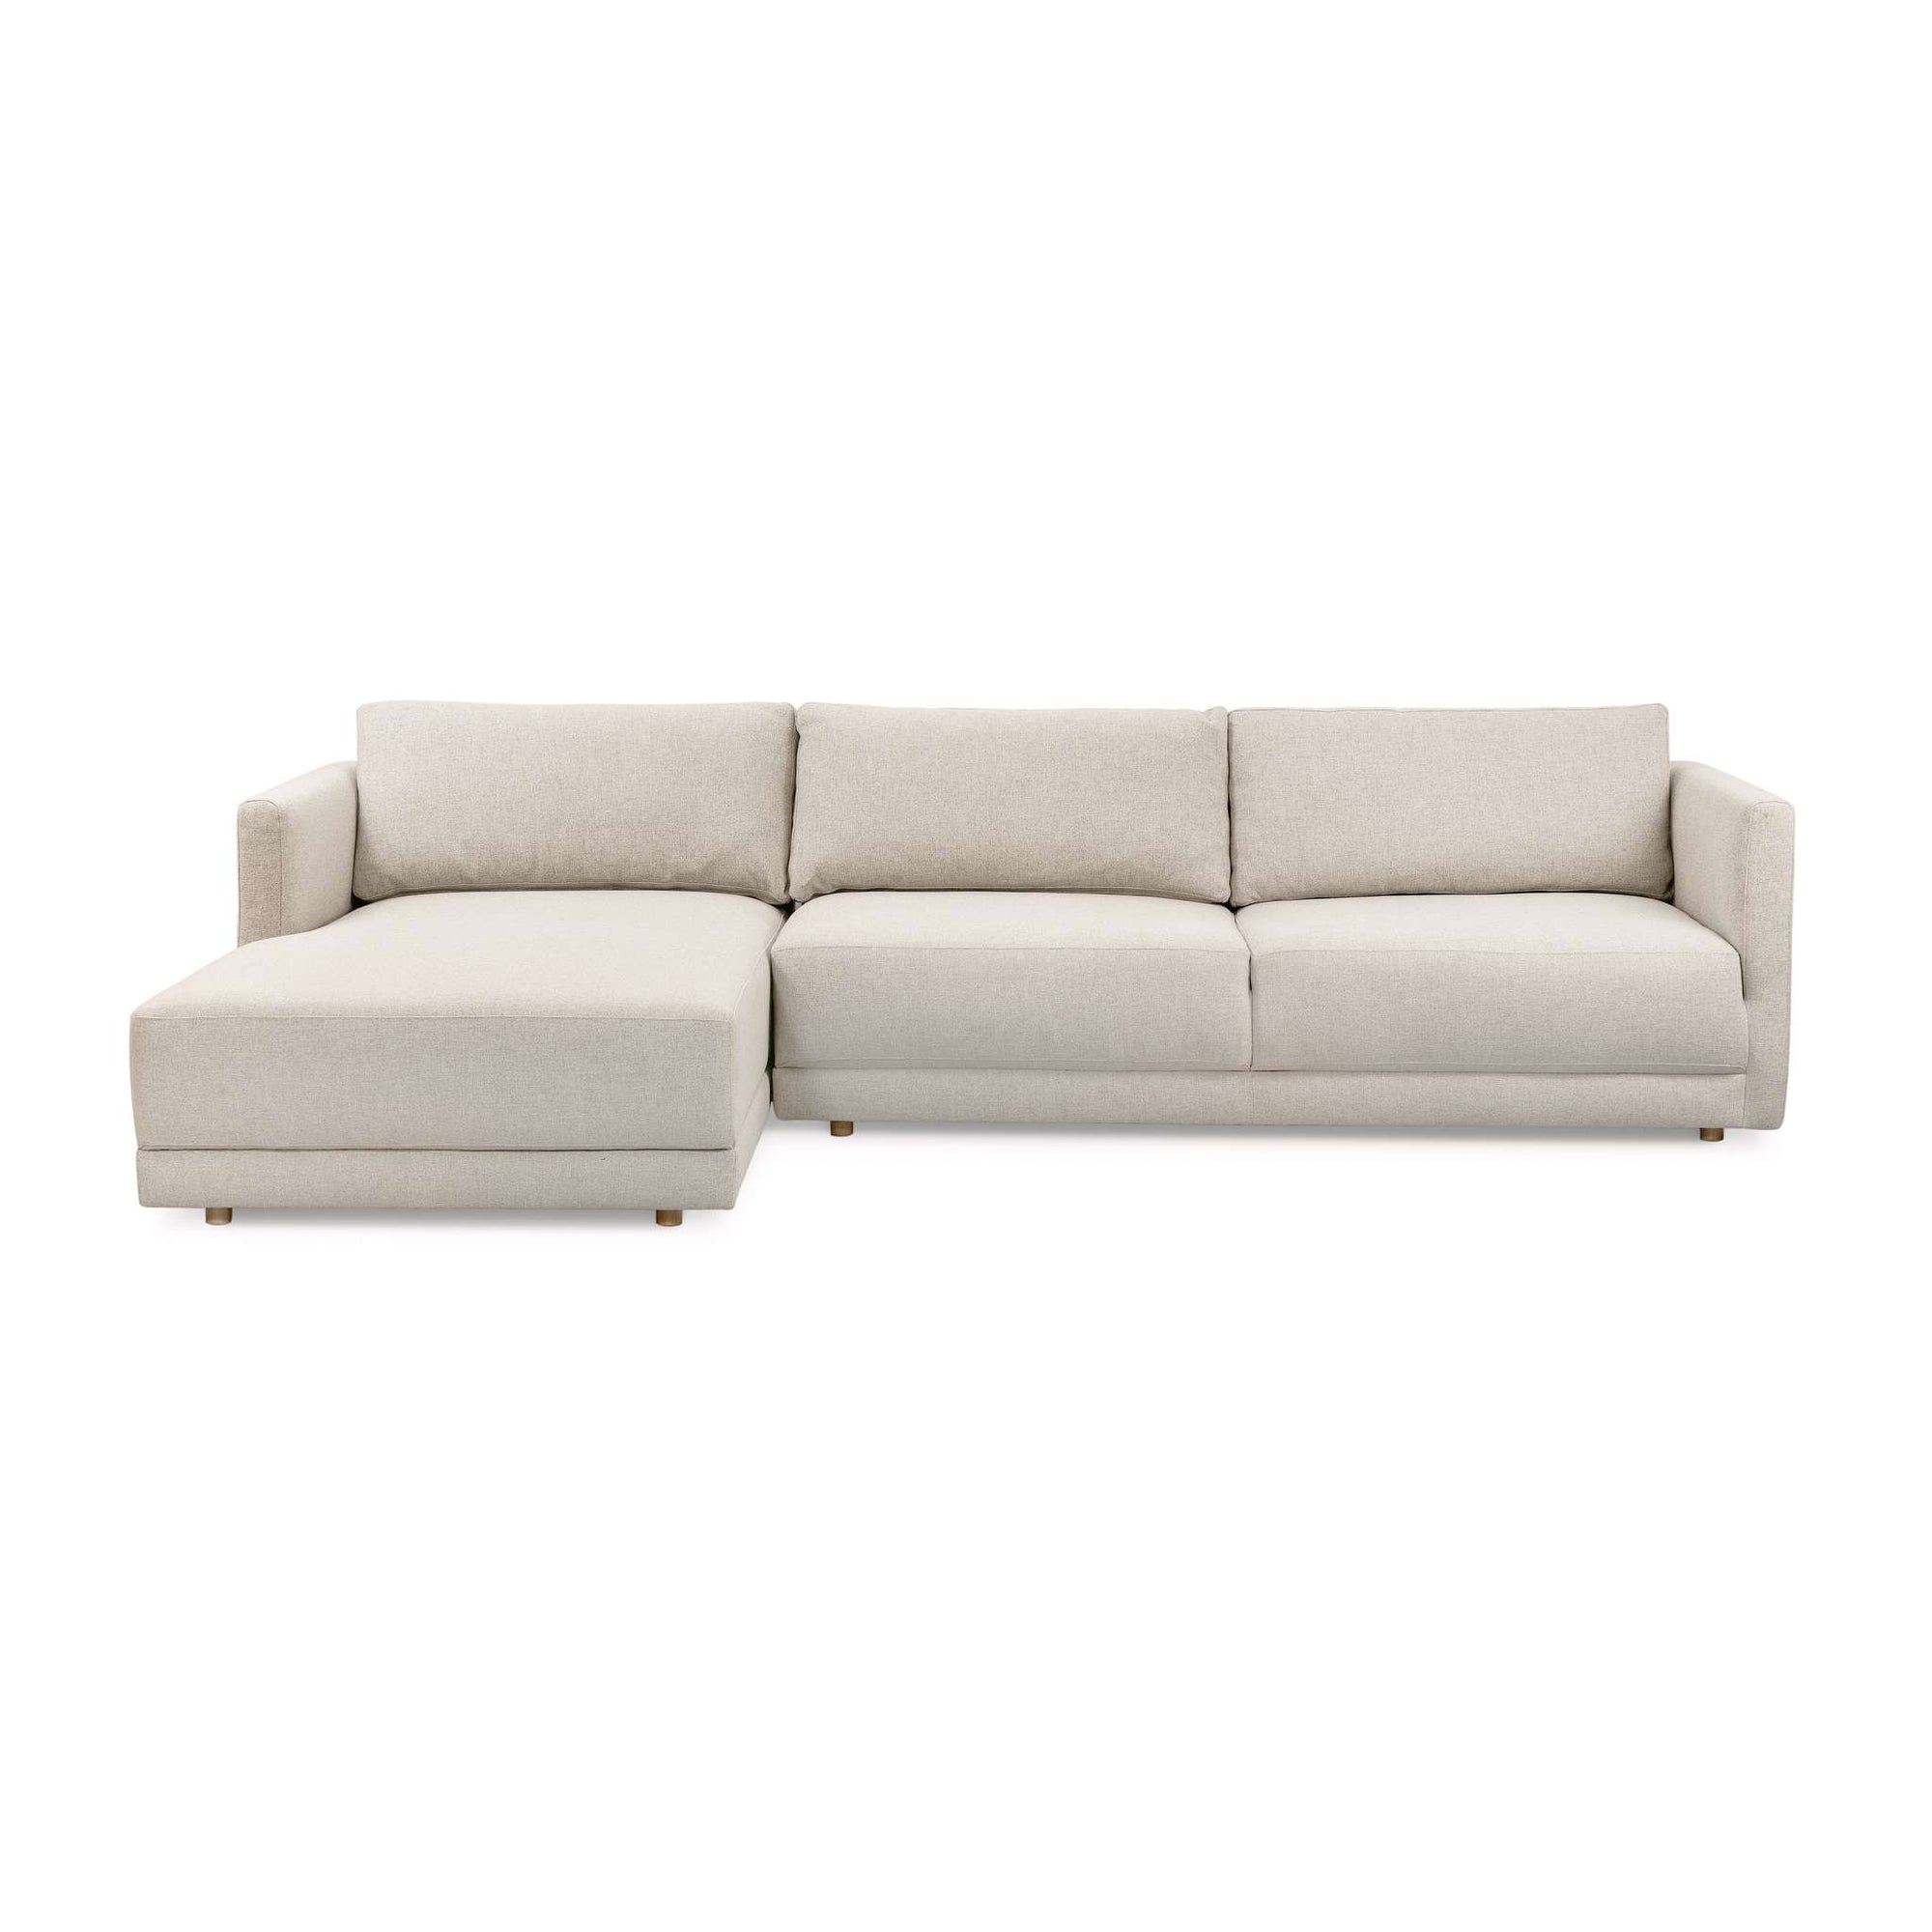 Braxton 2 Pc Sectional-Laf Chaise